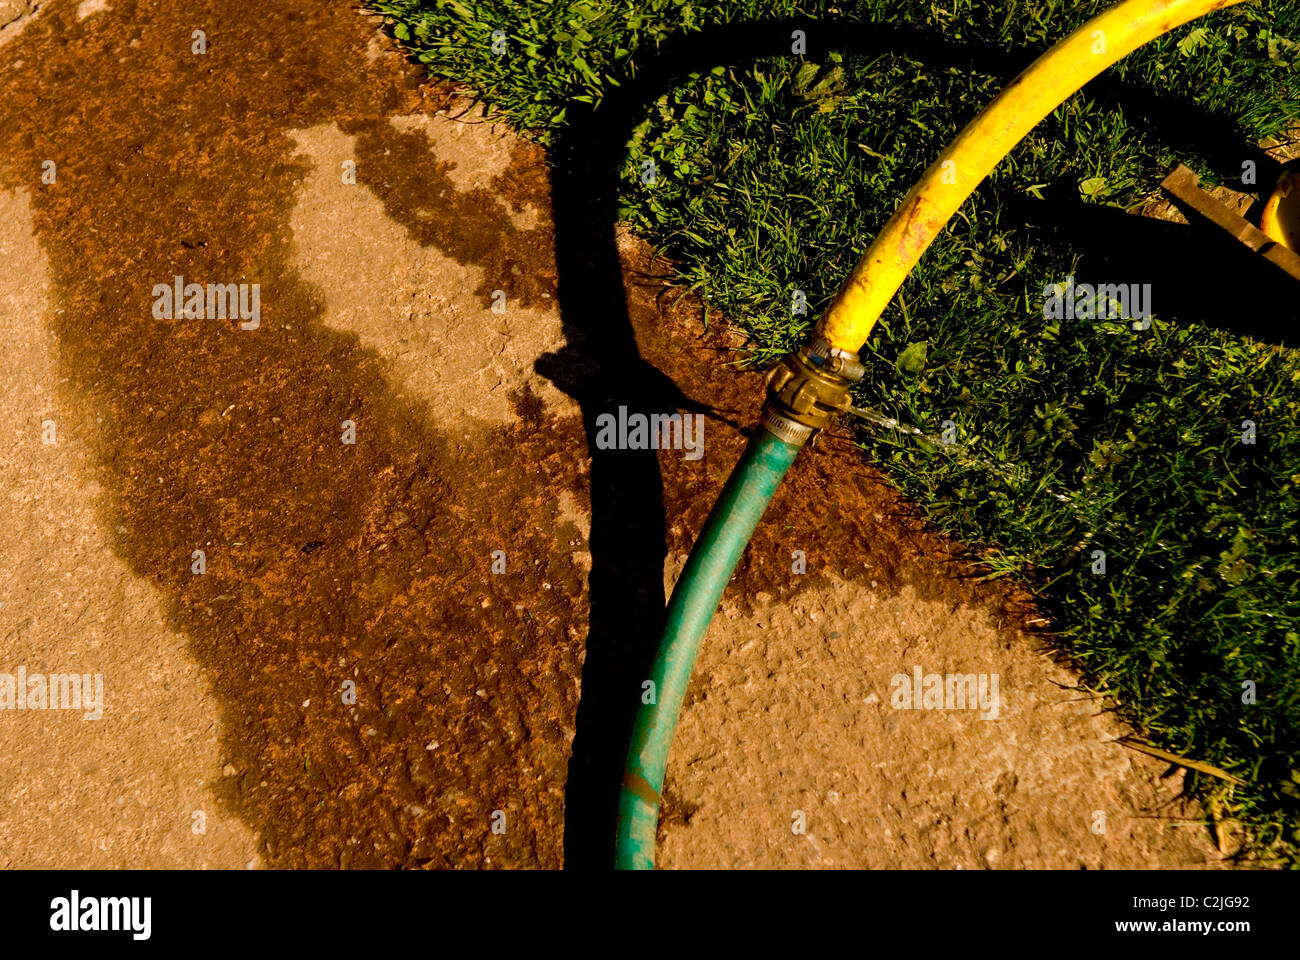 Leaking hose pipe Stock Photo